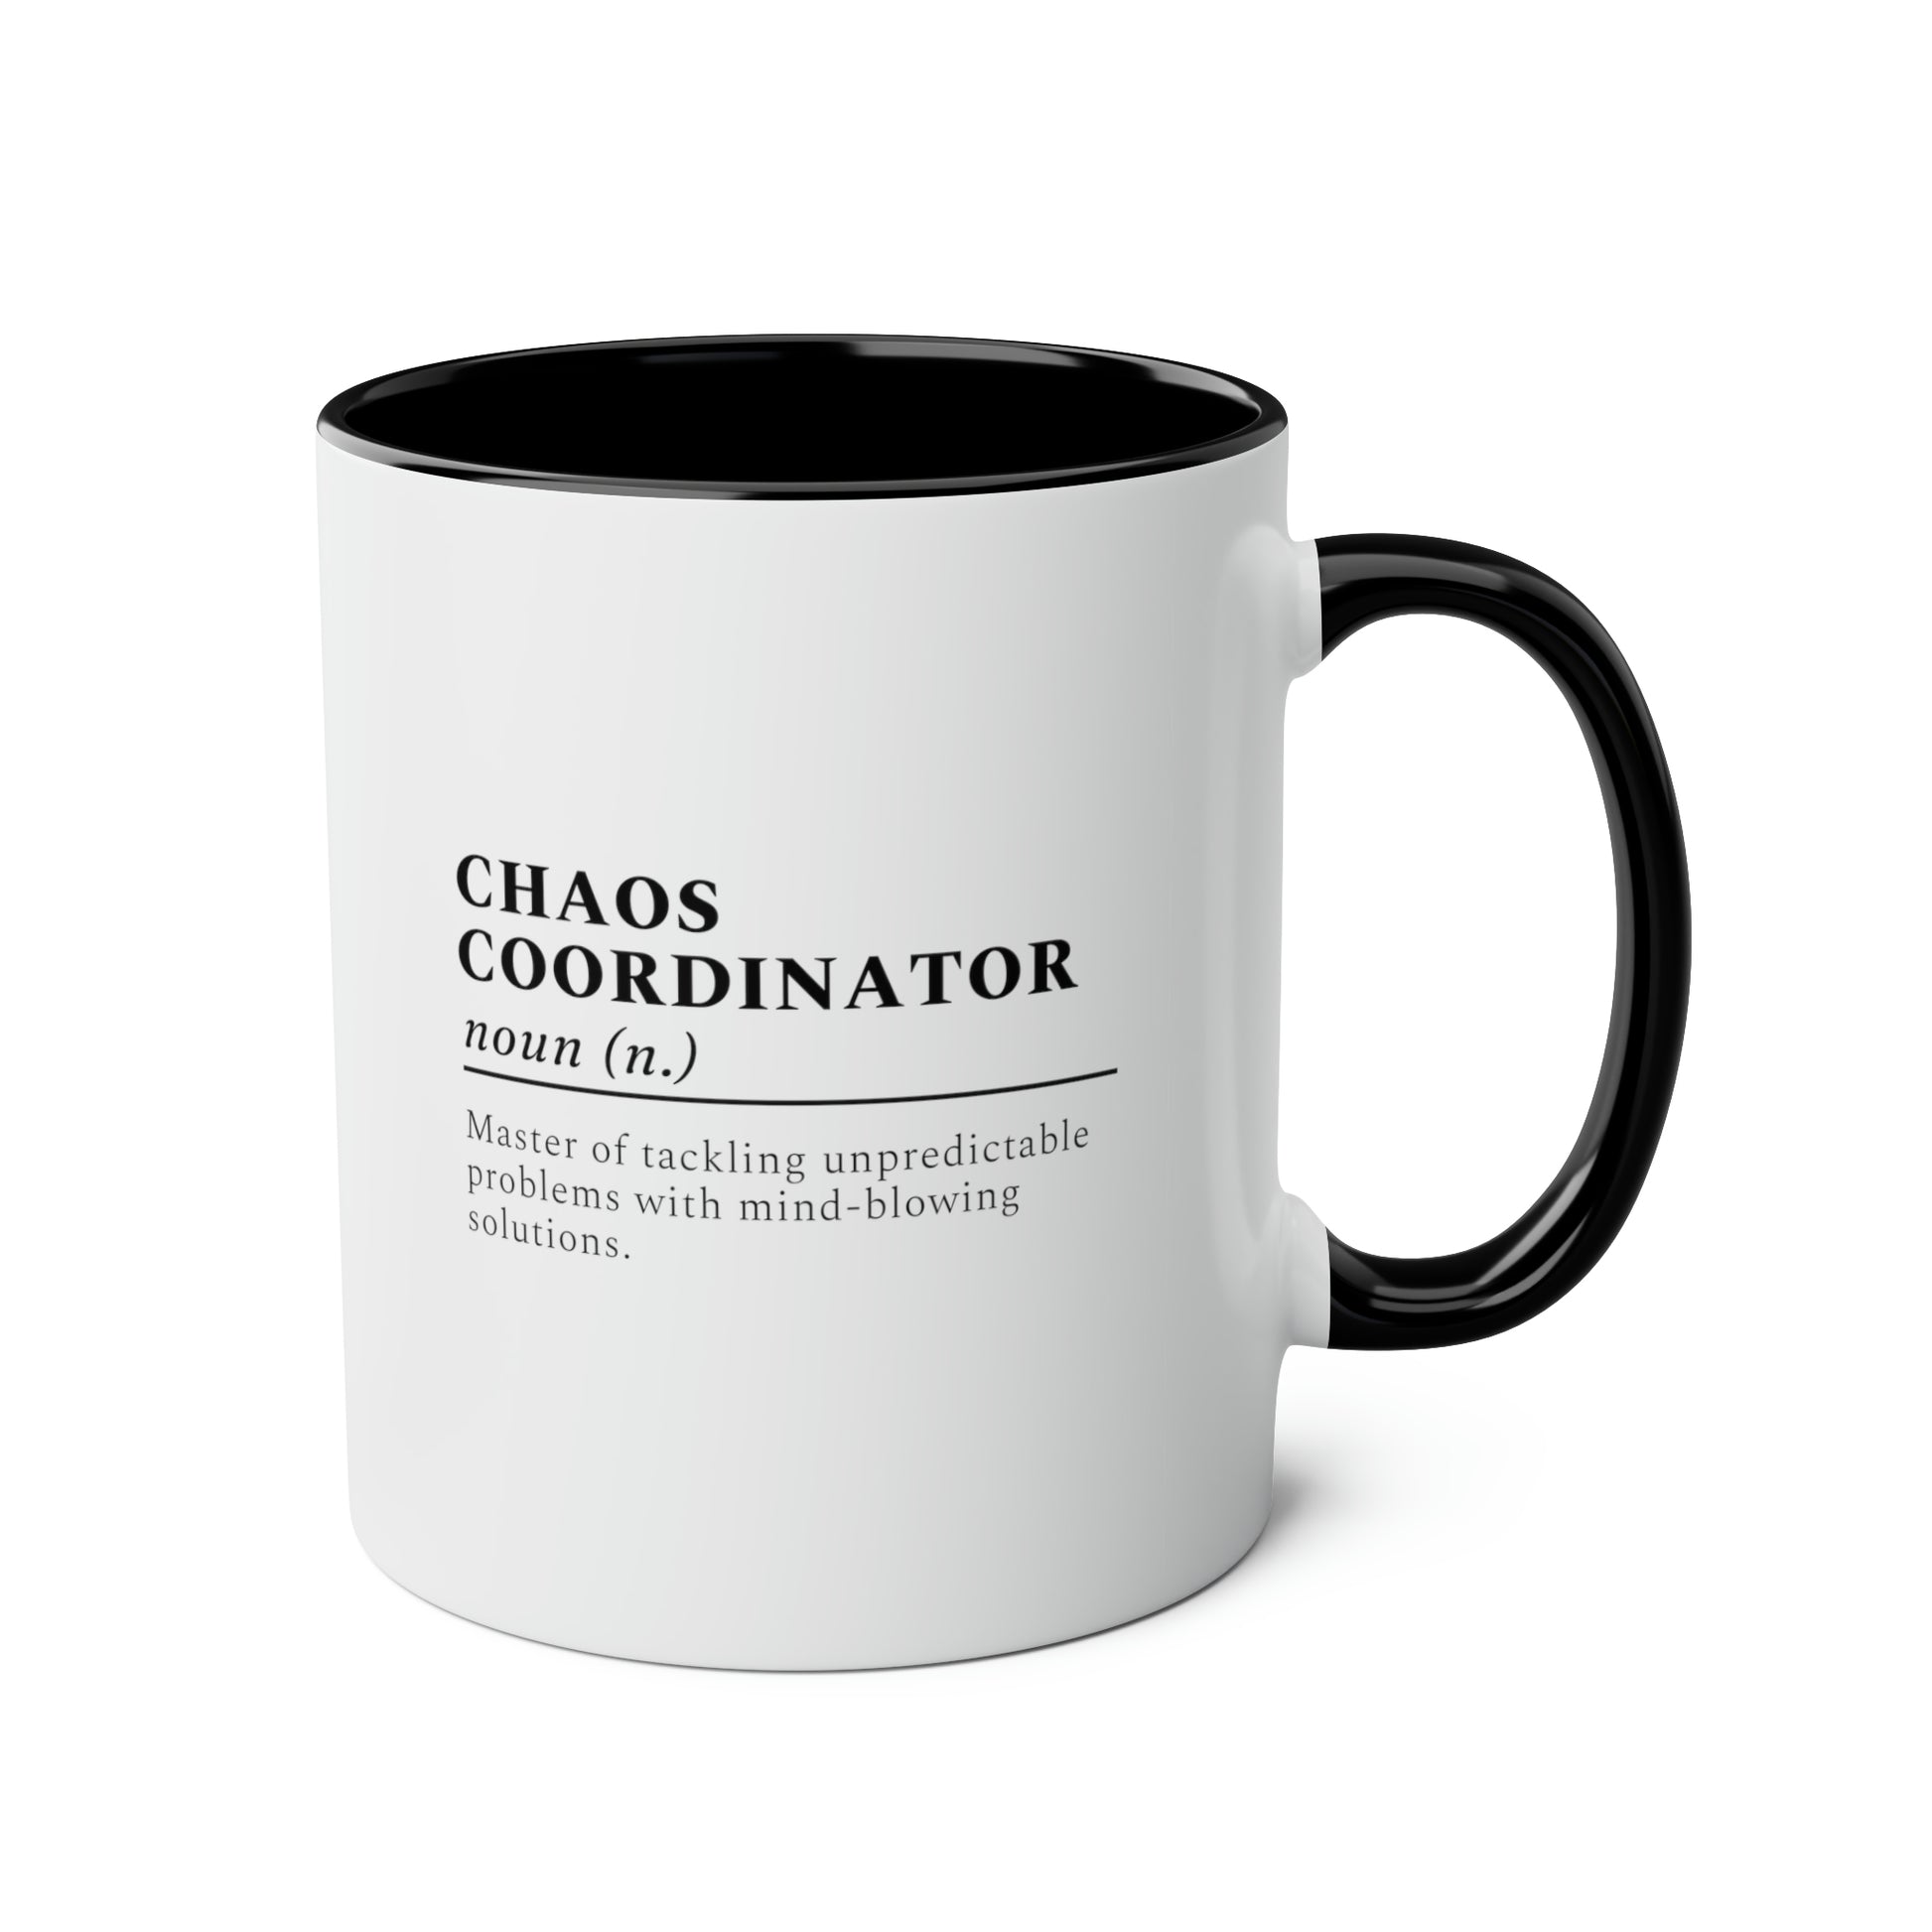 Chaos Coordinator Definition 11oz white with black accent funny large coffee mug gift for boss office manager appreciation christmas secret santa idea waveywares wavey wares wavywares wavy wares